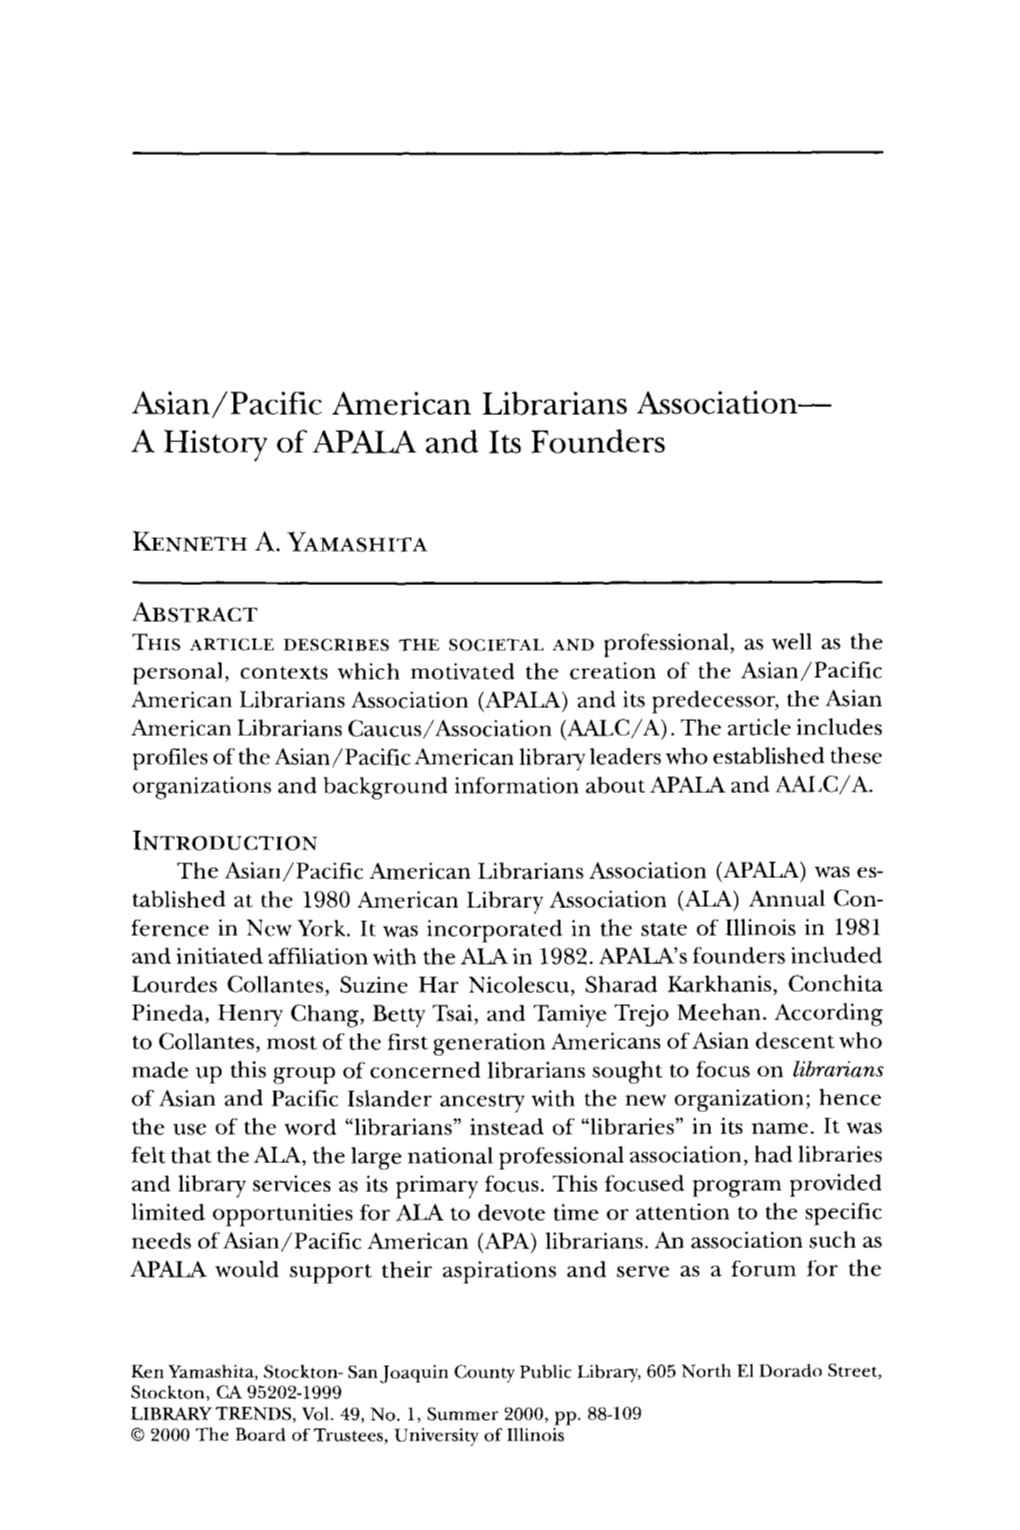 A History of APALA and Its Founders